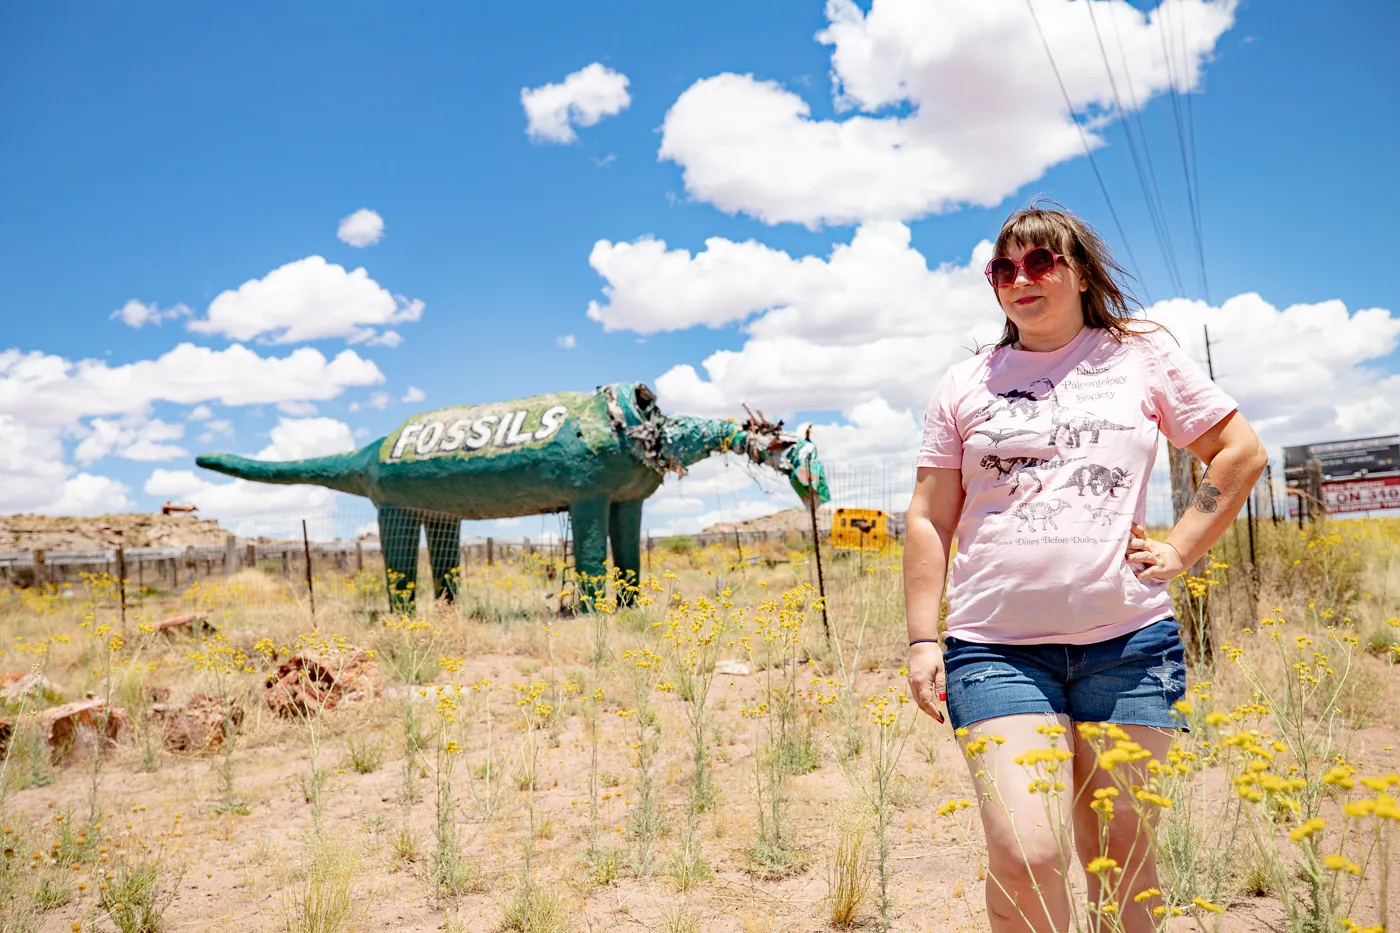 Dinosaur at Stewart's Petrified Wood in Holbrook, Arizona Route 66 Roadside Attraction